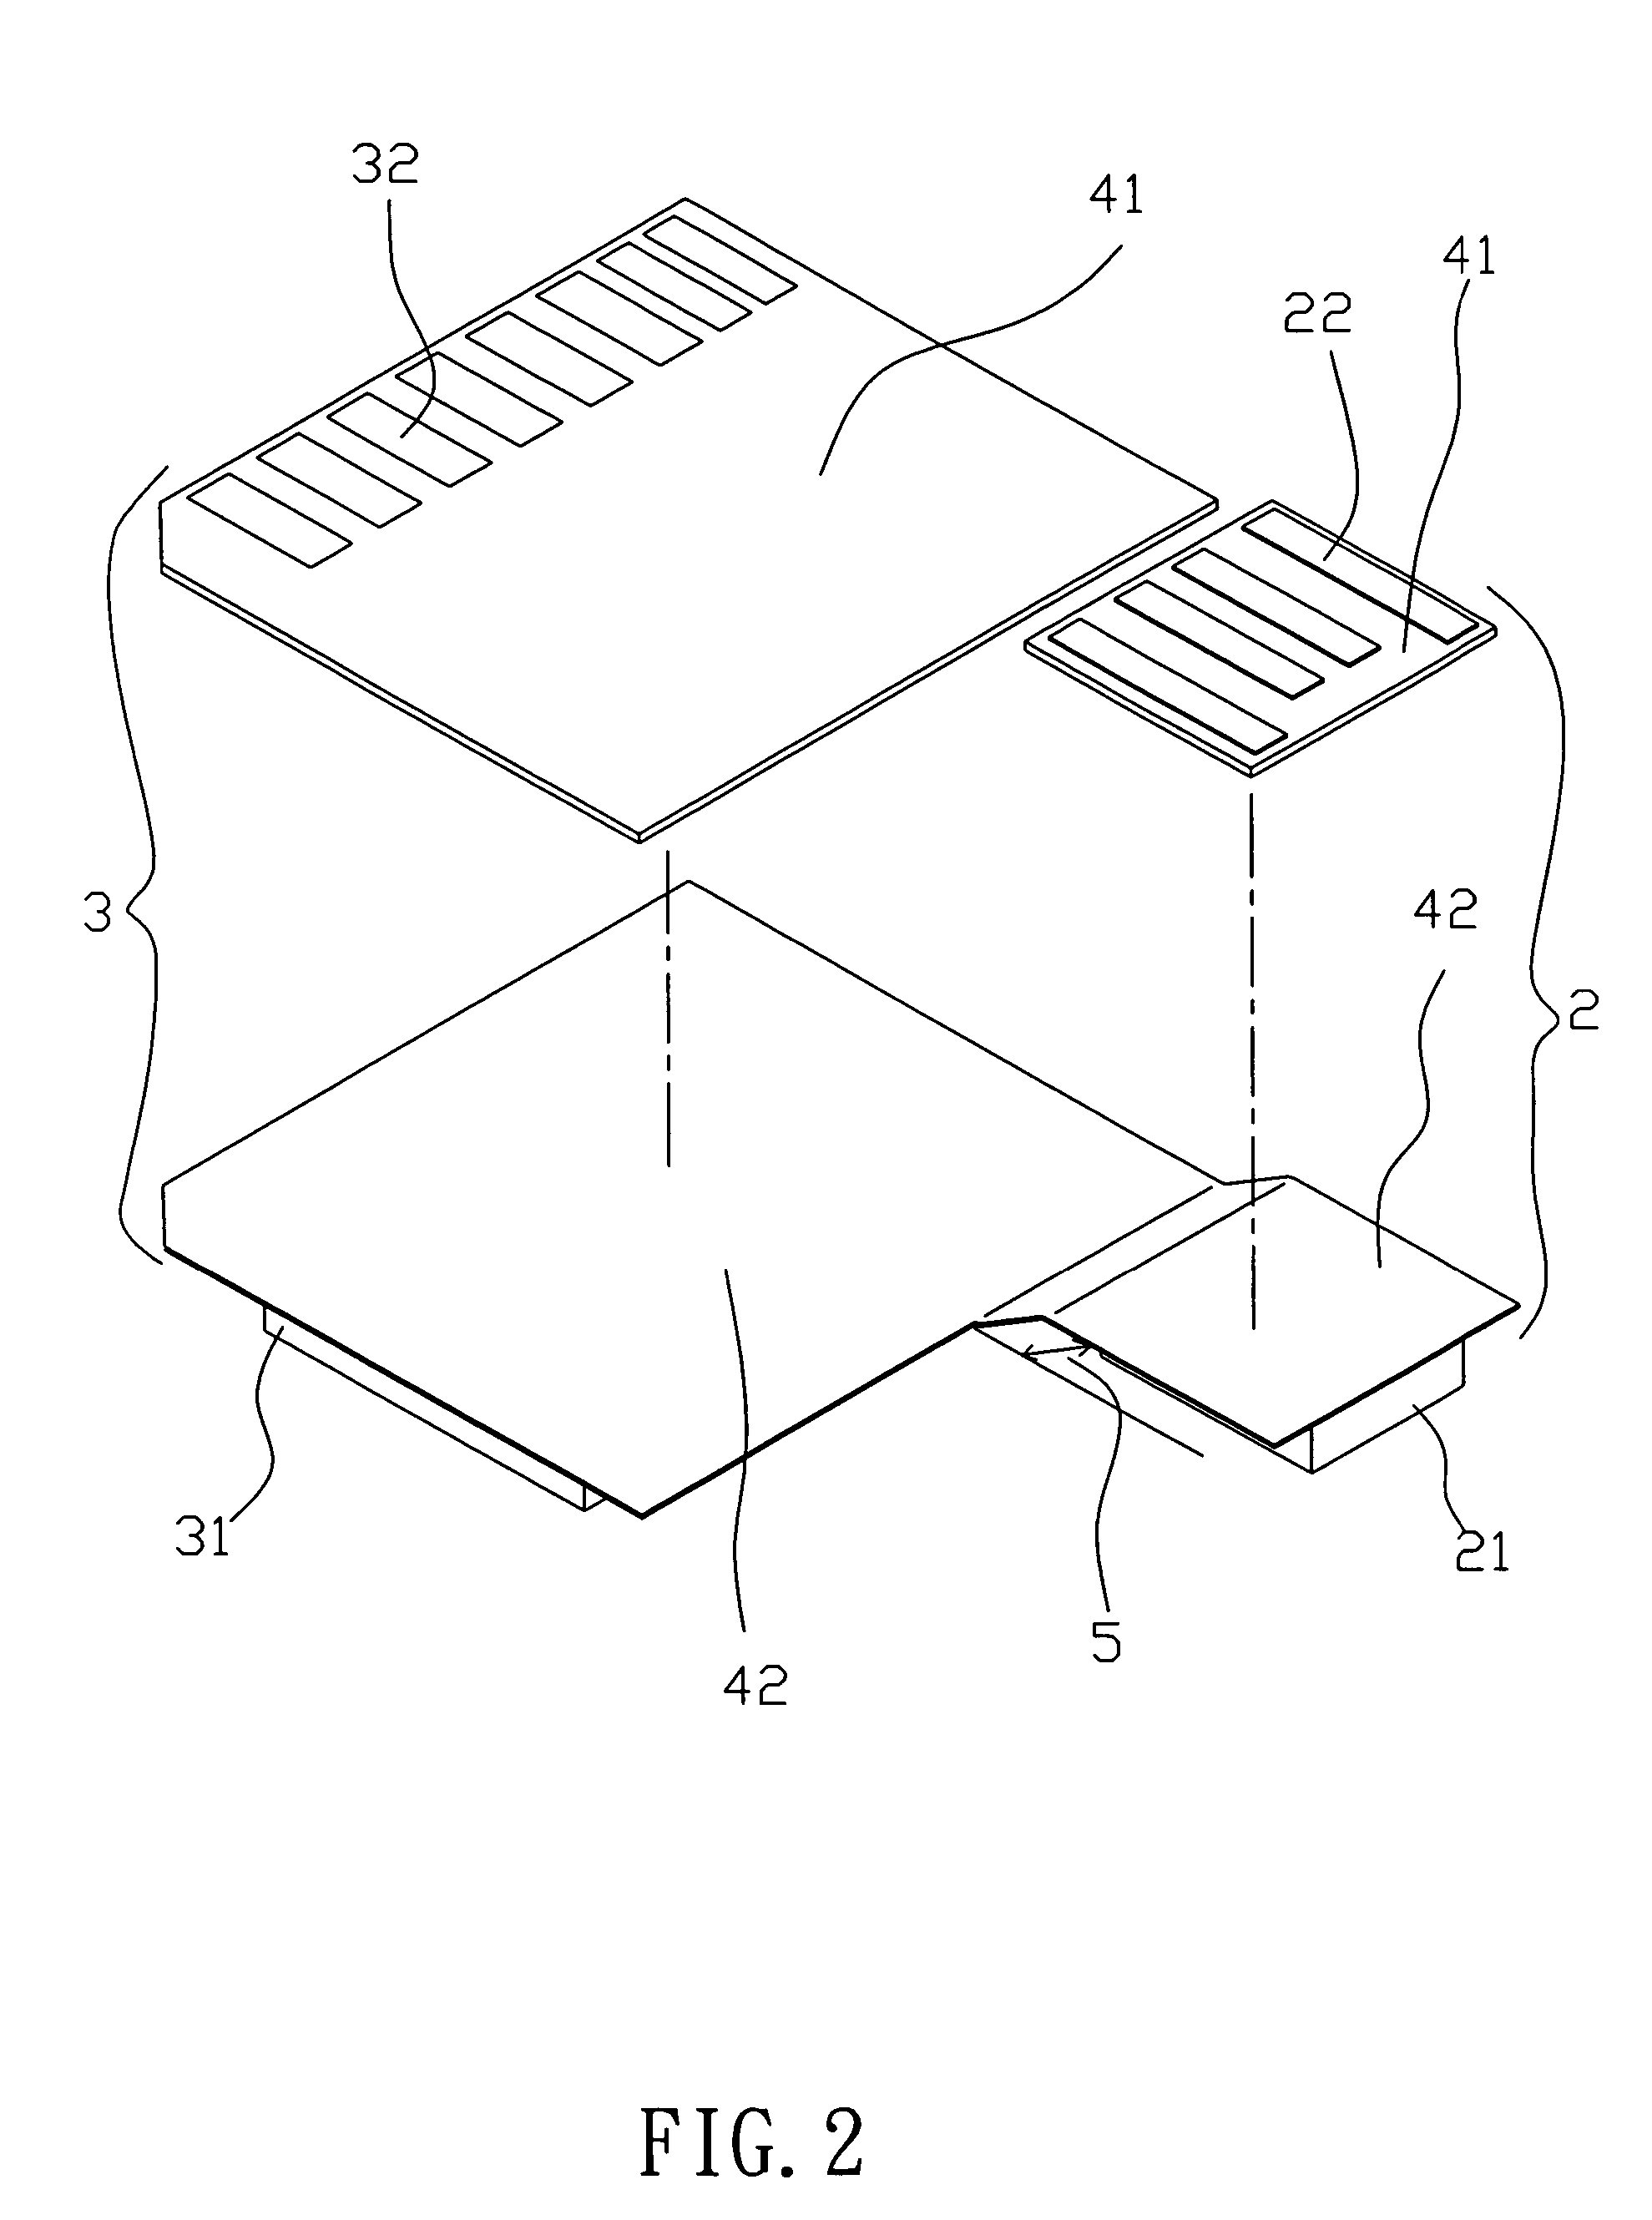 Structure for connecting a USB communication interface in a flash memory card by the height difference of a rigid flexible board